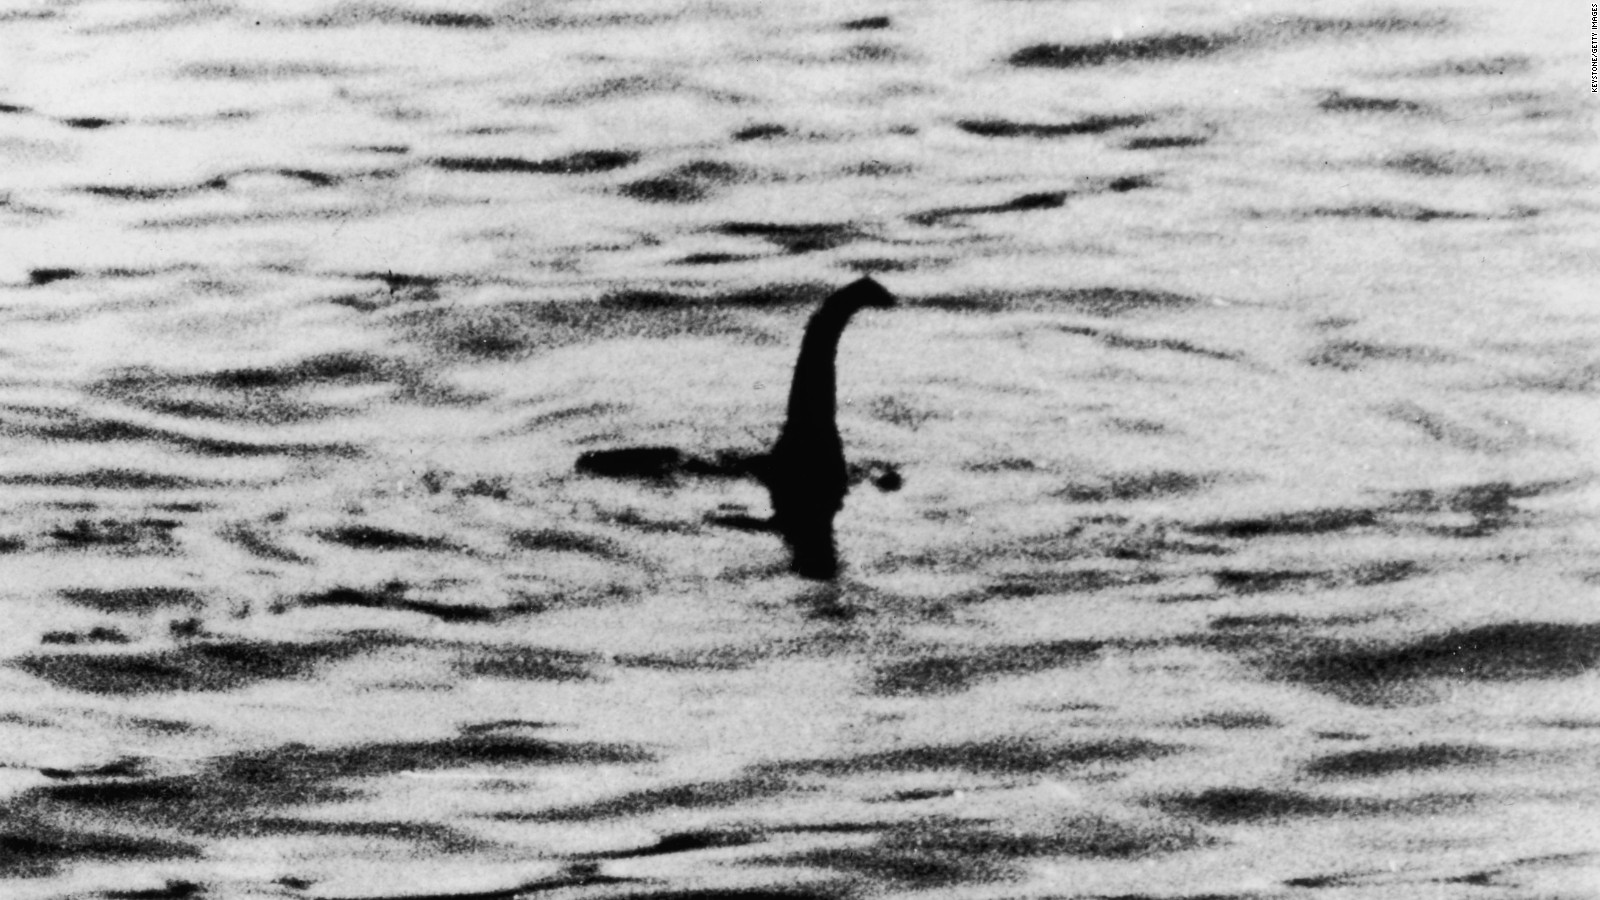 The Loch Ness monster might be a giant eel, scientists say | CNN Travel